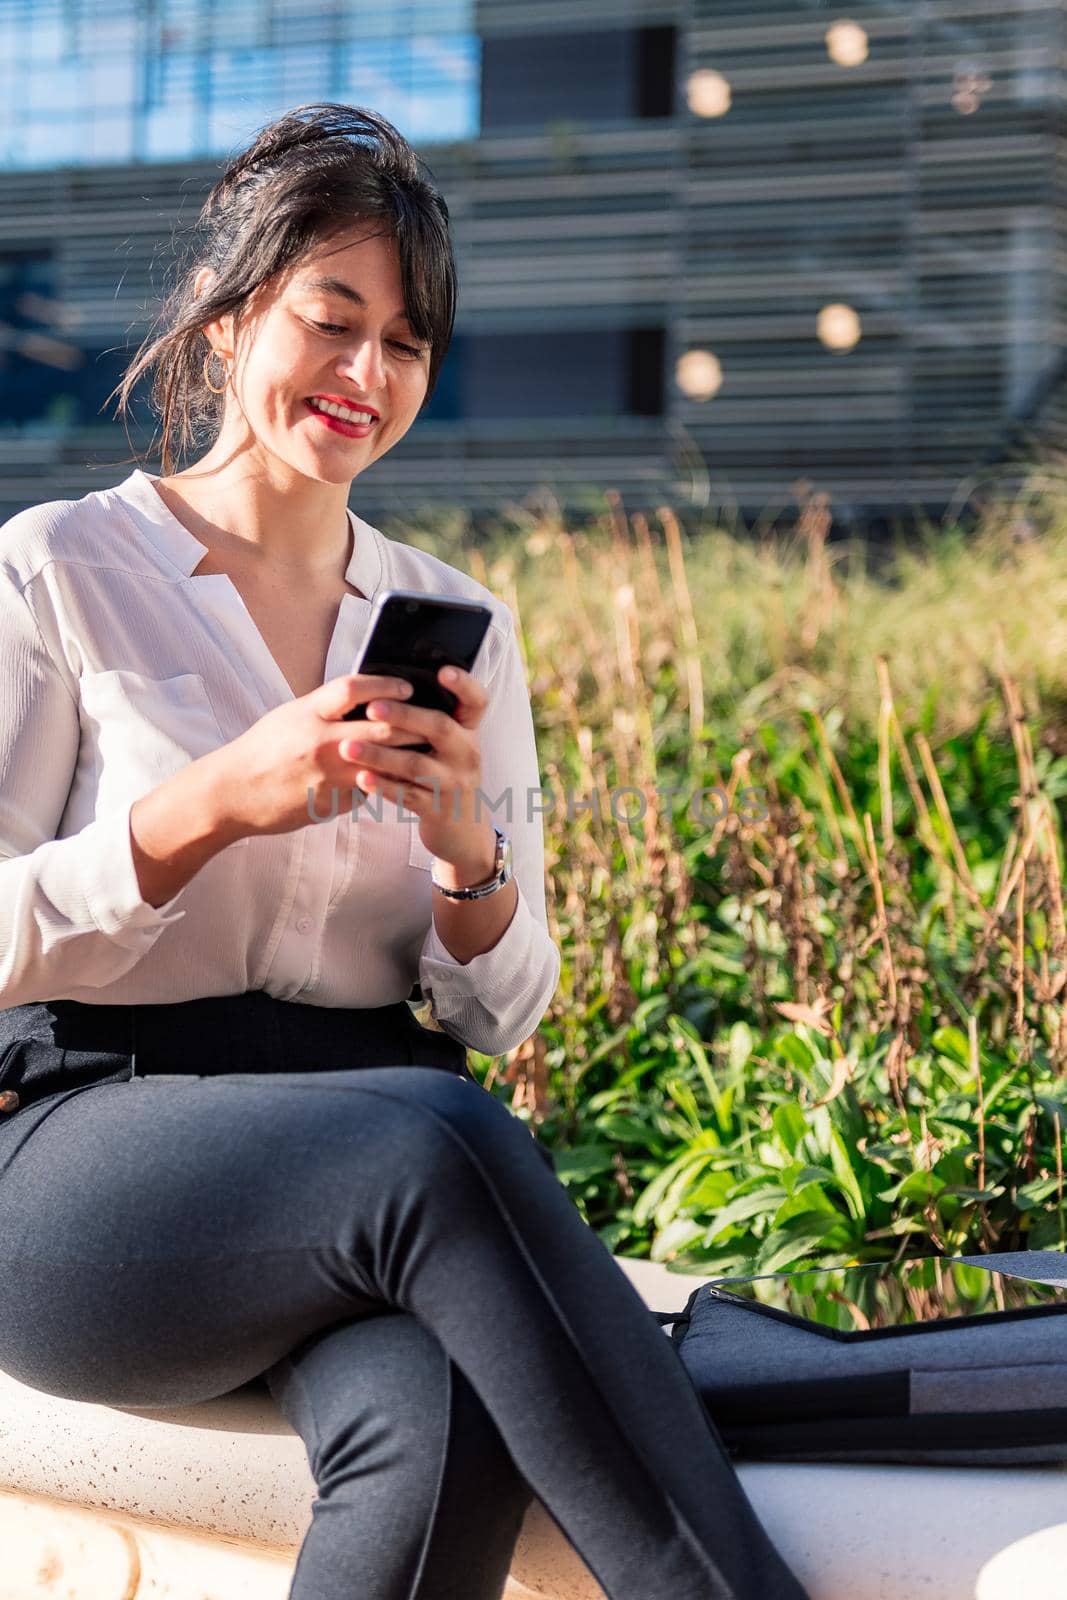 smiling businesswoman typing on her phone sitting in a park in the financial district, concept of digital entrepreneur and urban lifestyle, copy space for text